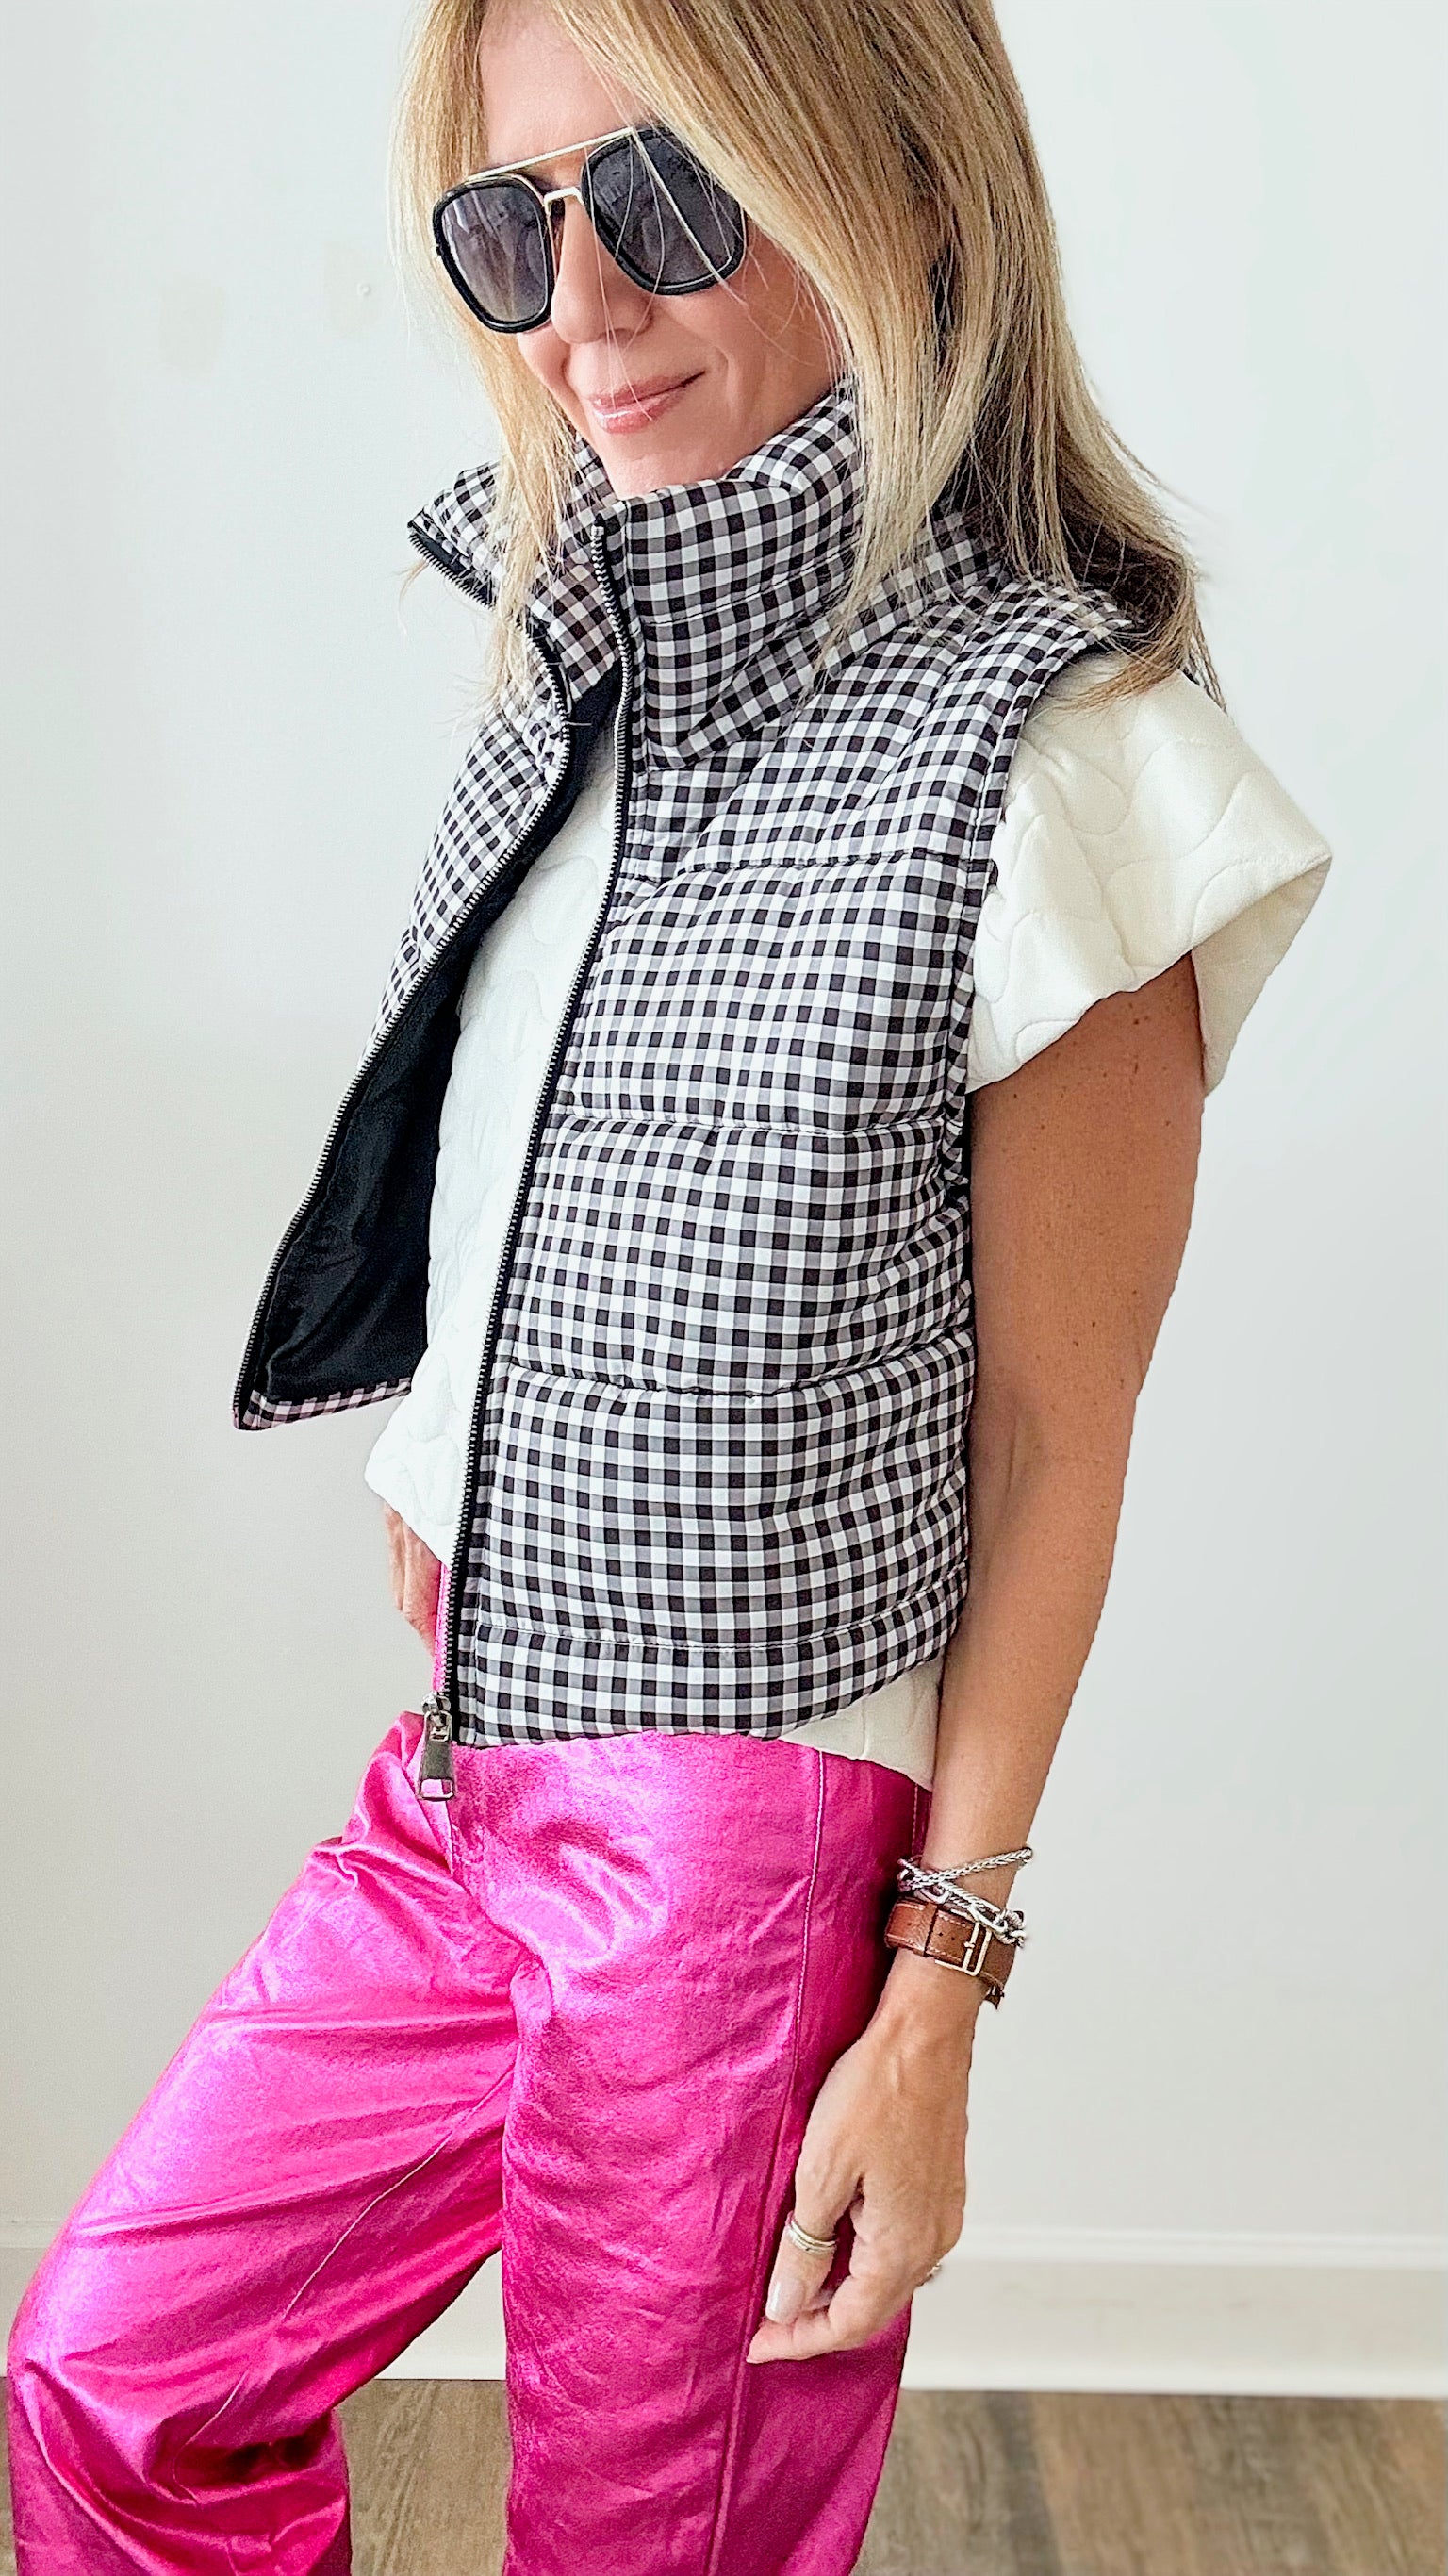 Plaid Italian Vest - Black/ White-150 Cardigan Layers-Italianissimo-Coastal Bloom Boutique, find the trendiest versions of the popular styles and looks Located in Indialantic, FL